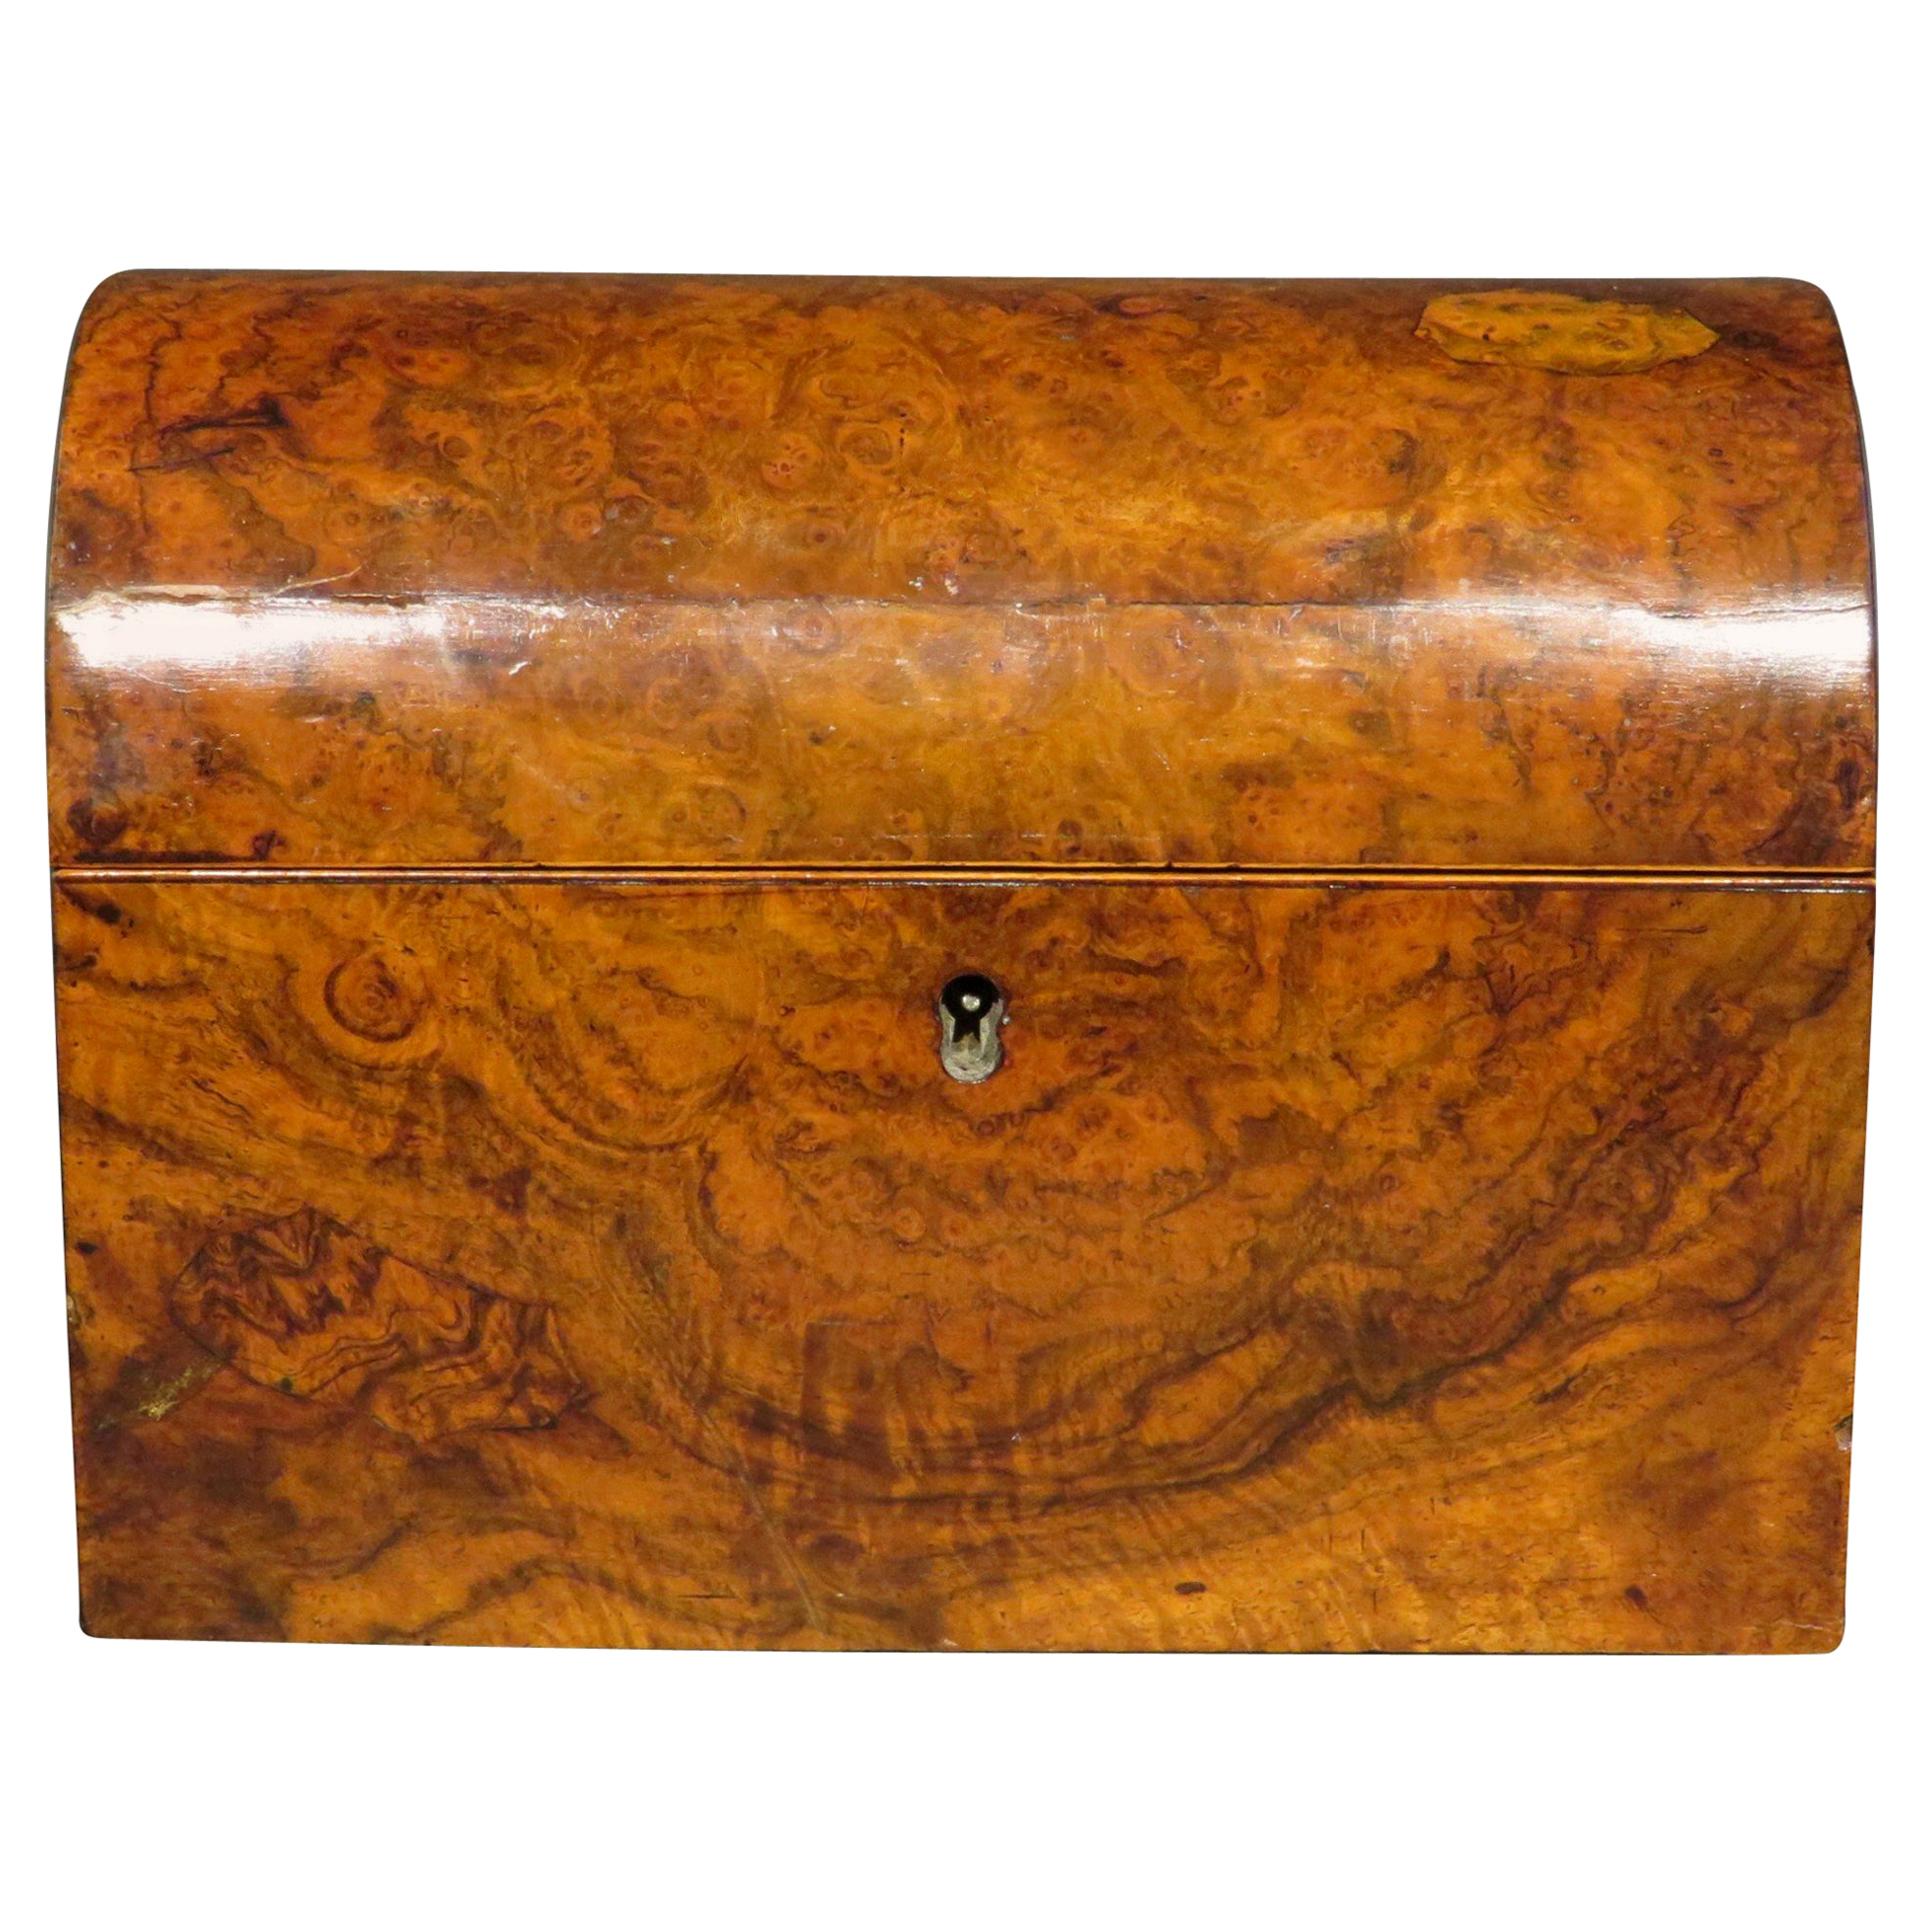 The highly figured domed case exhibiting a fine warm patina overall and opening to an interior housing twin tea canisters with confirming hinged lids and retaining its original functioning lock mechanism. This very handsome caddy is also accompanied